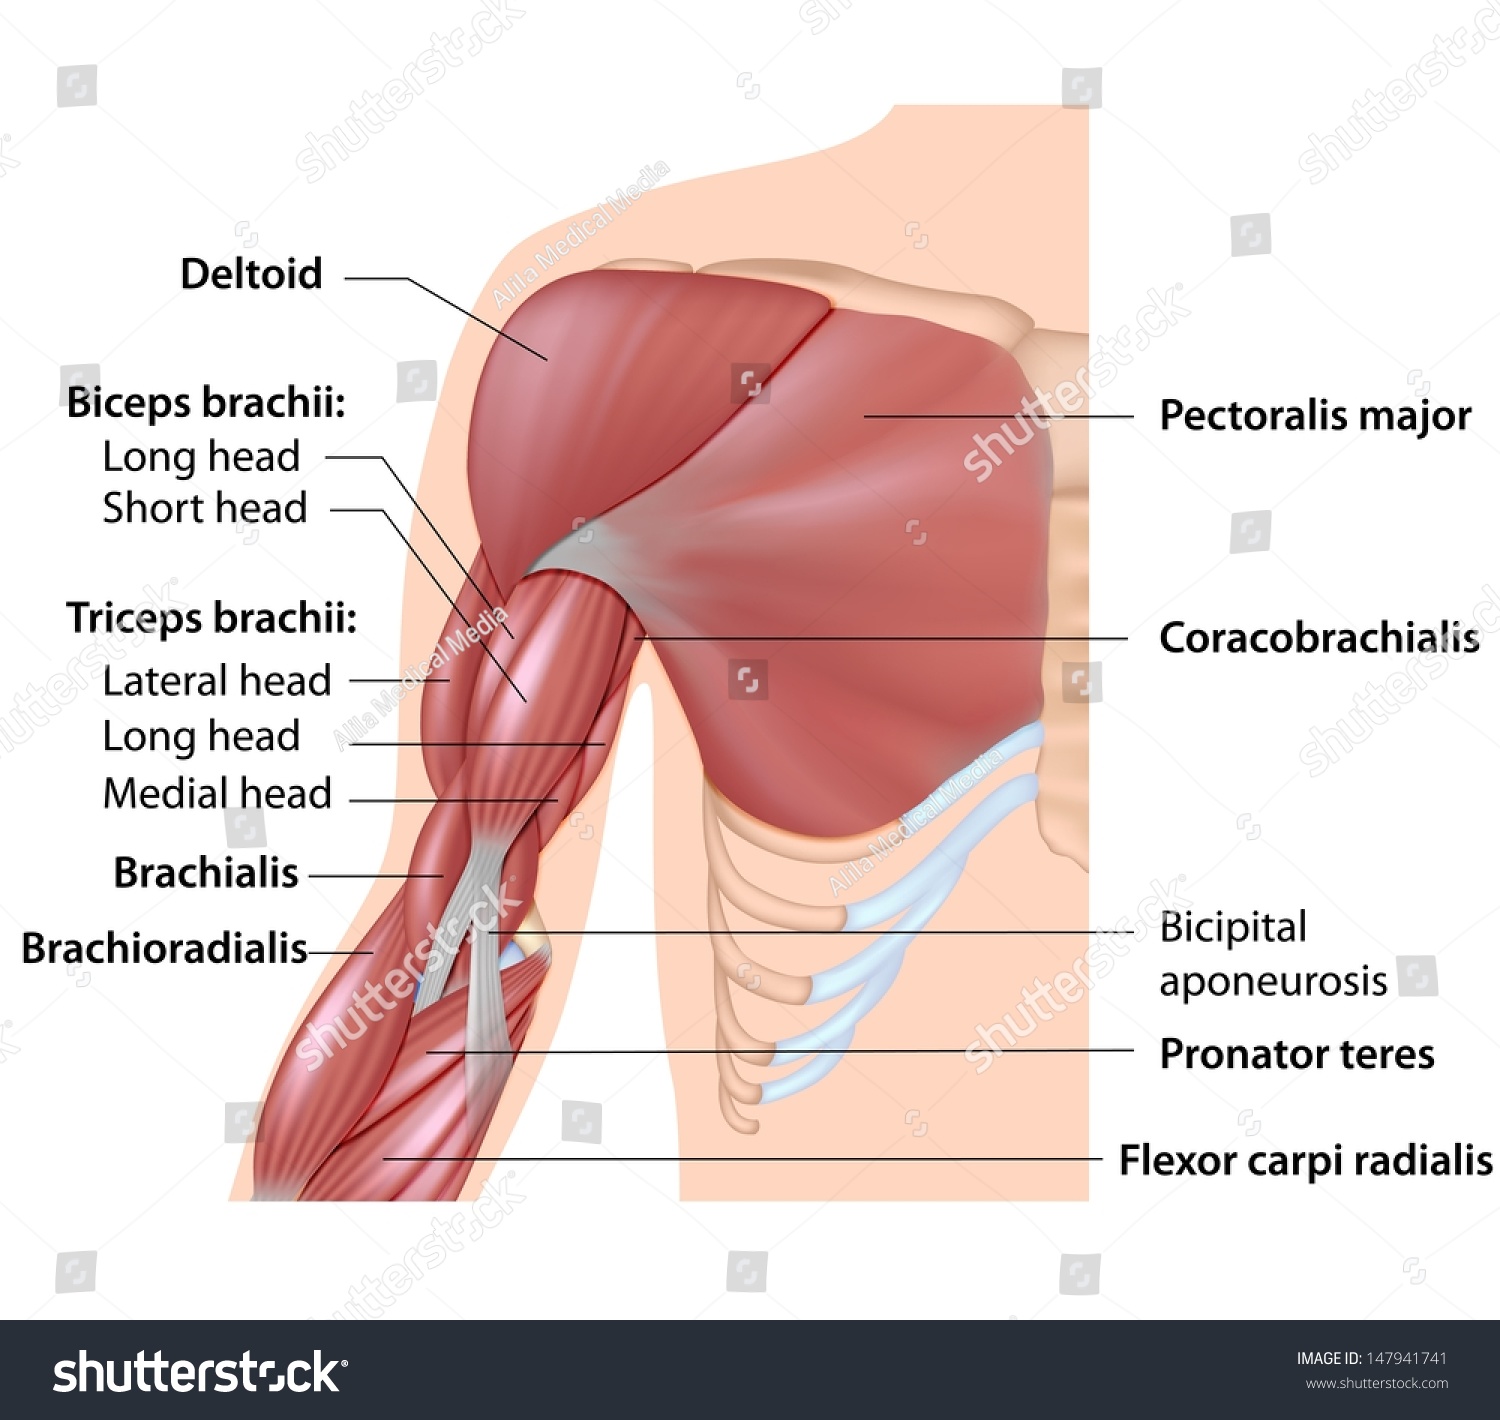 Muscles Arm Anatomy Labeled Diagram Stock Illustration 147941741